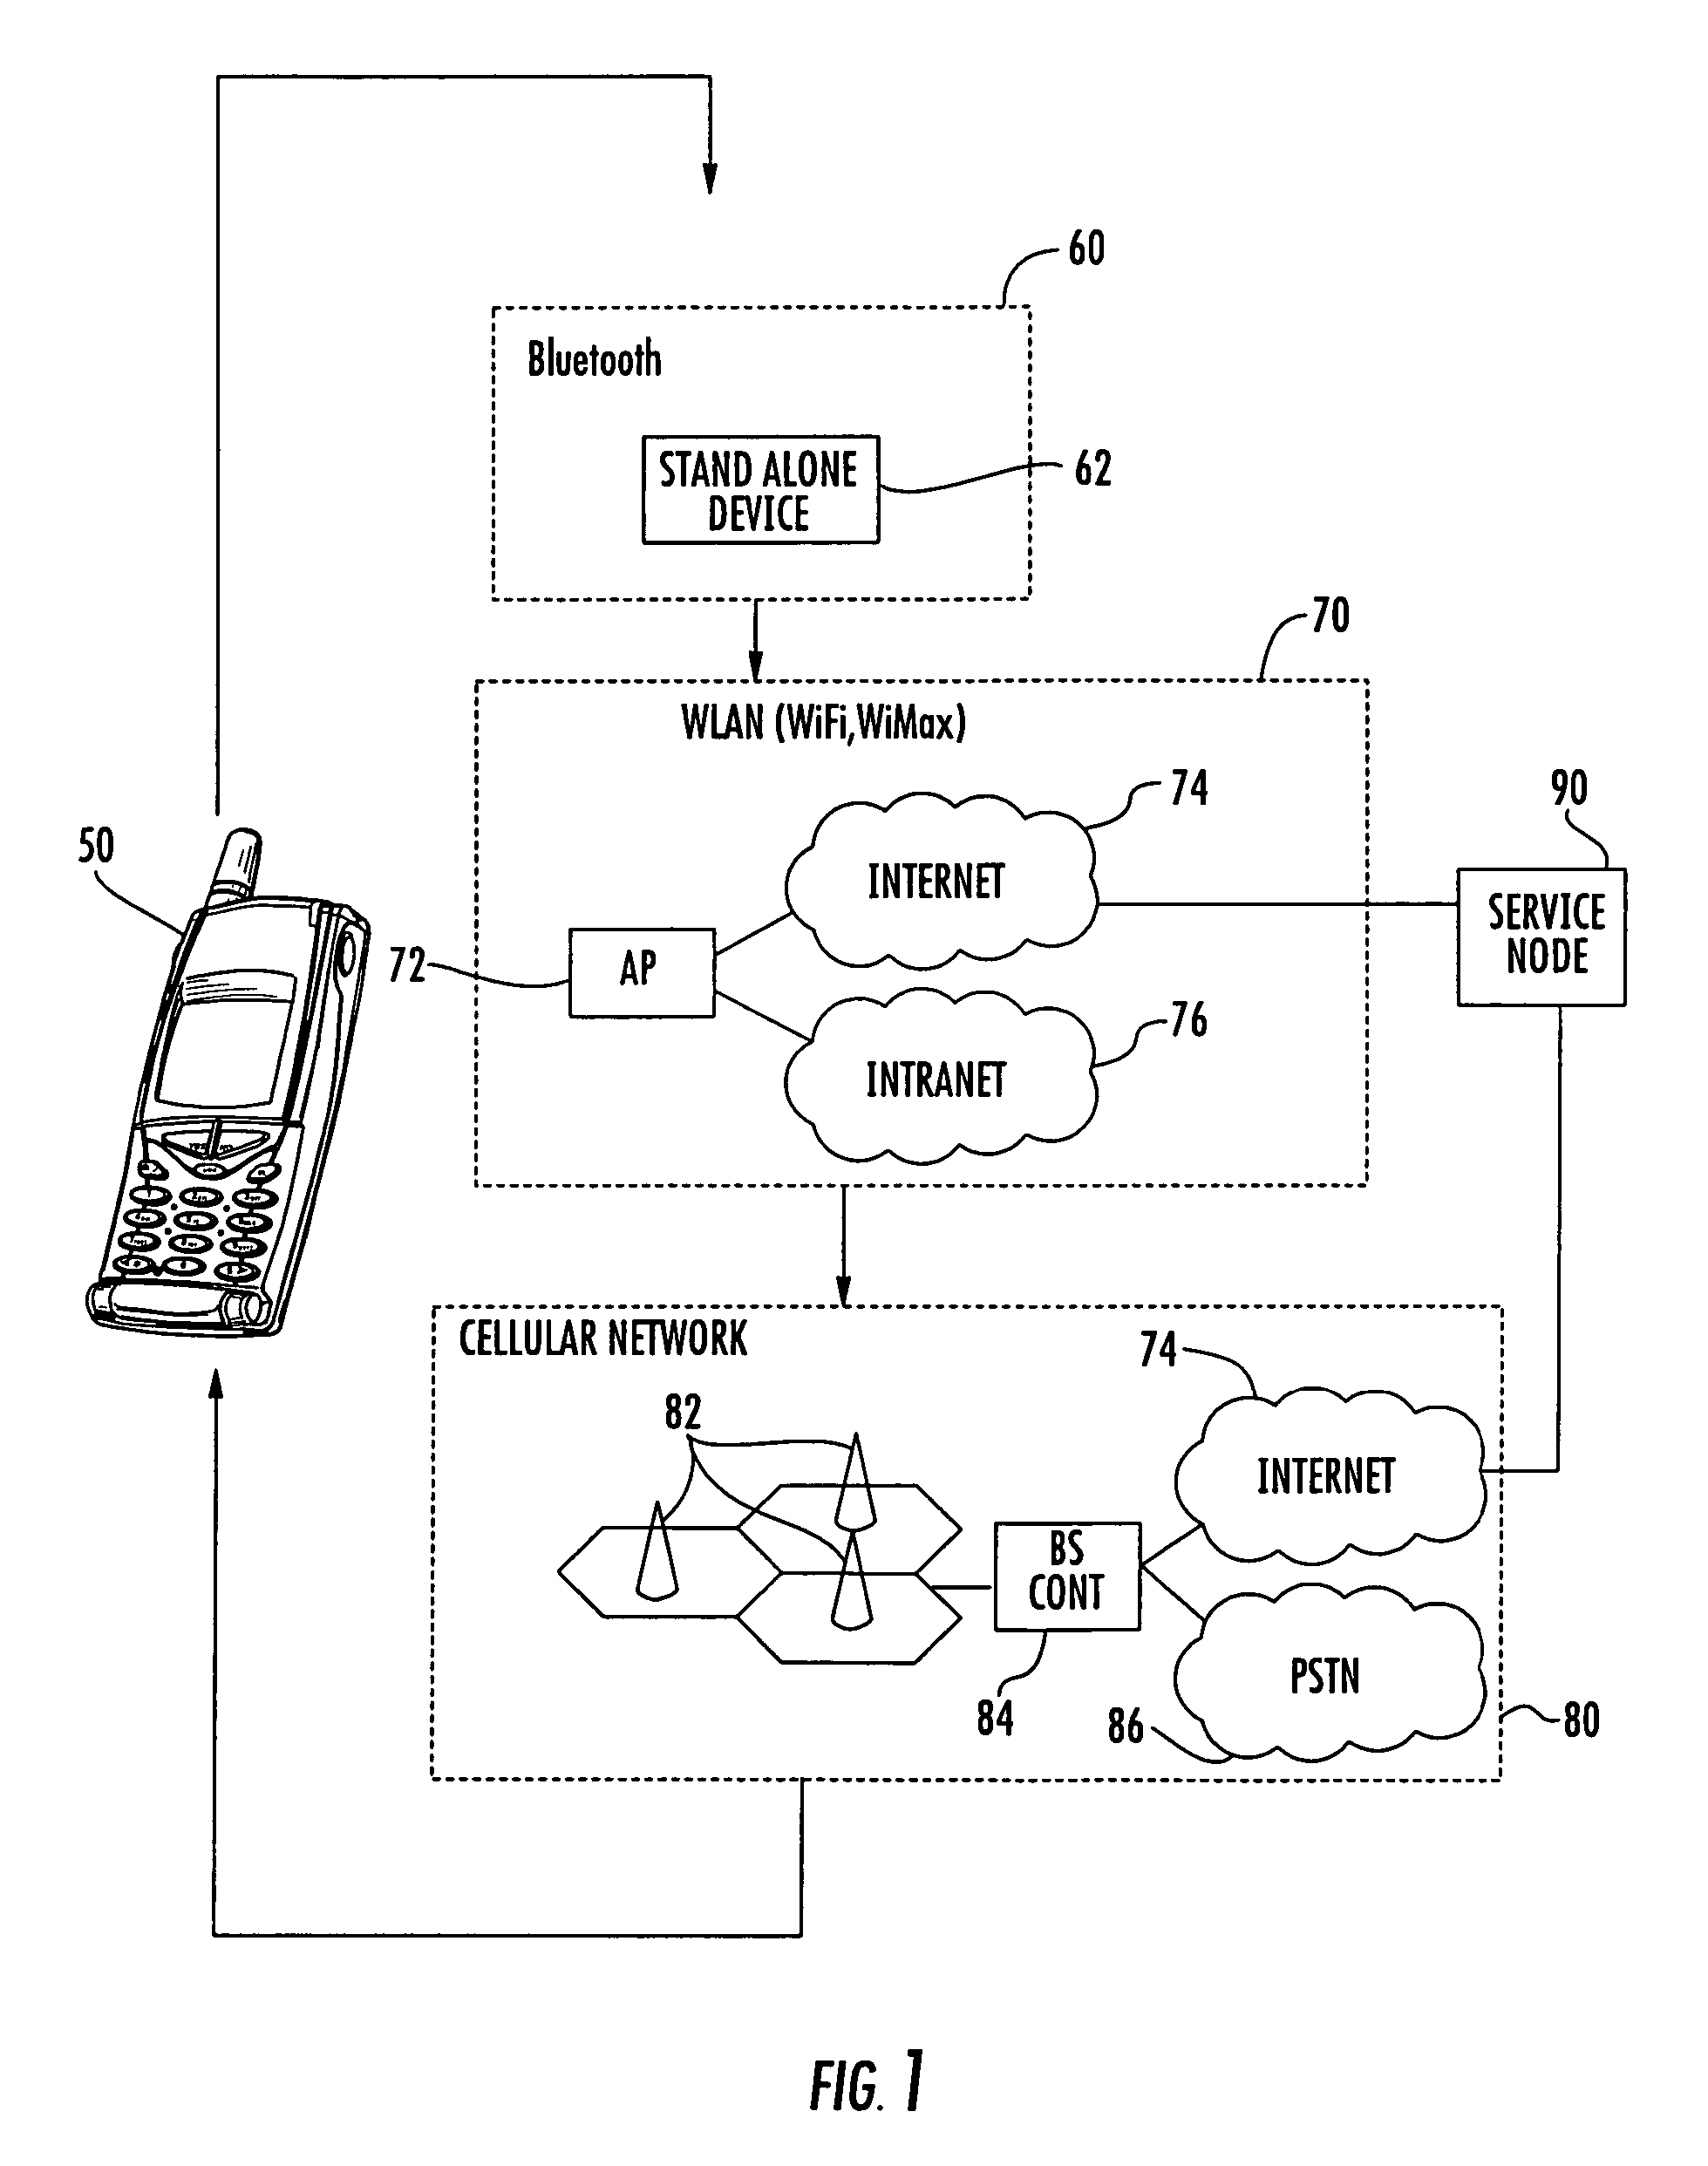 Mobile device with a mobility analyzer and associated methods